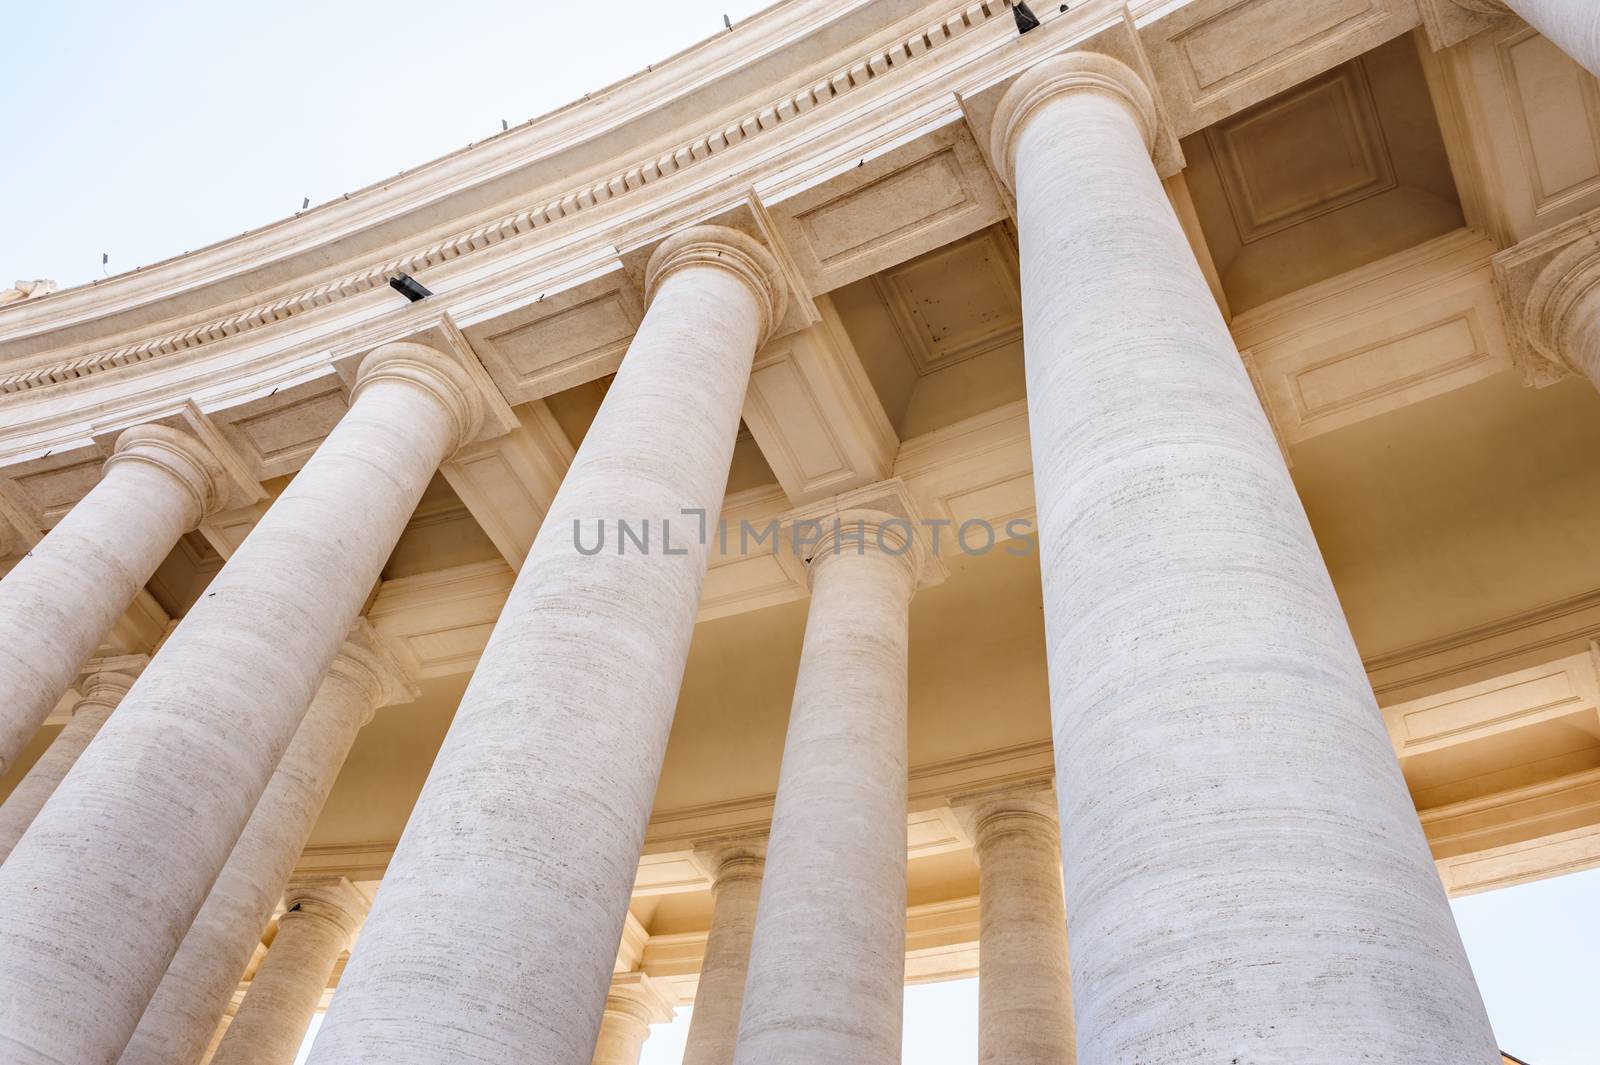 Famous colonnade of St. Peter's cathedral in Vatican